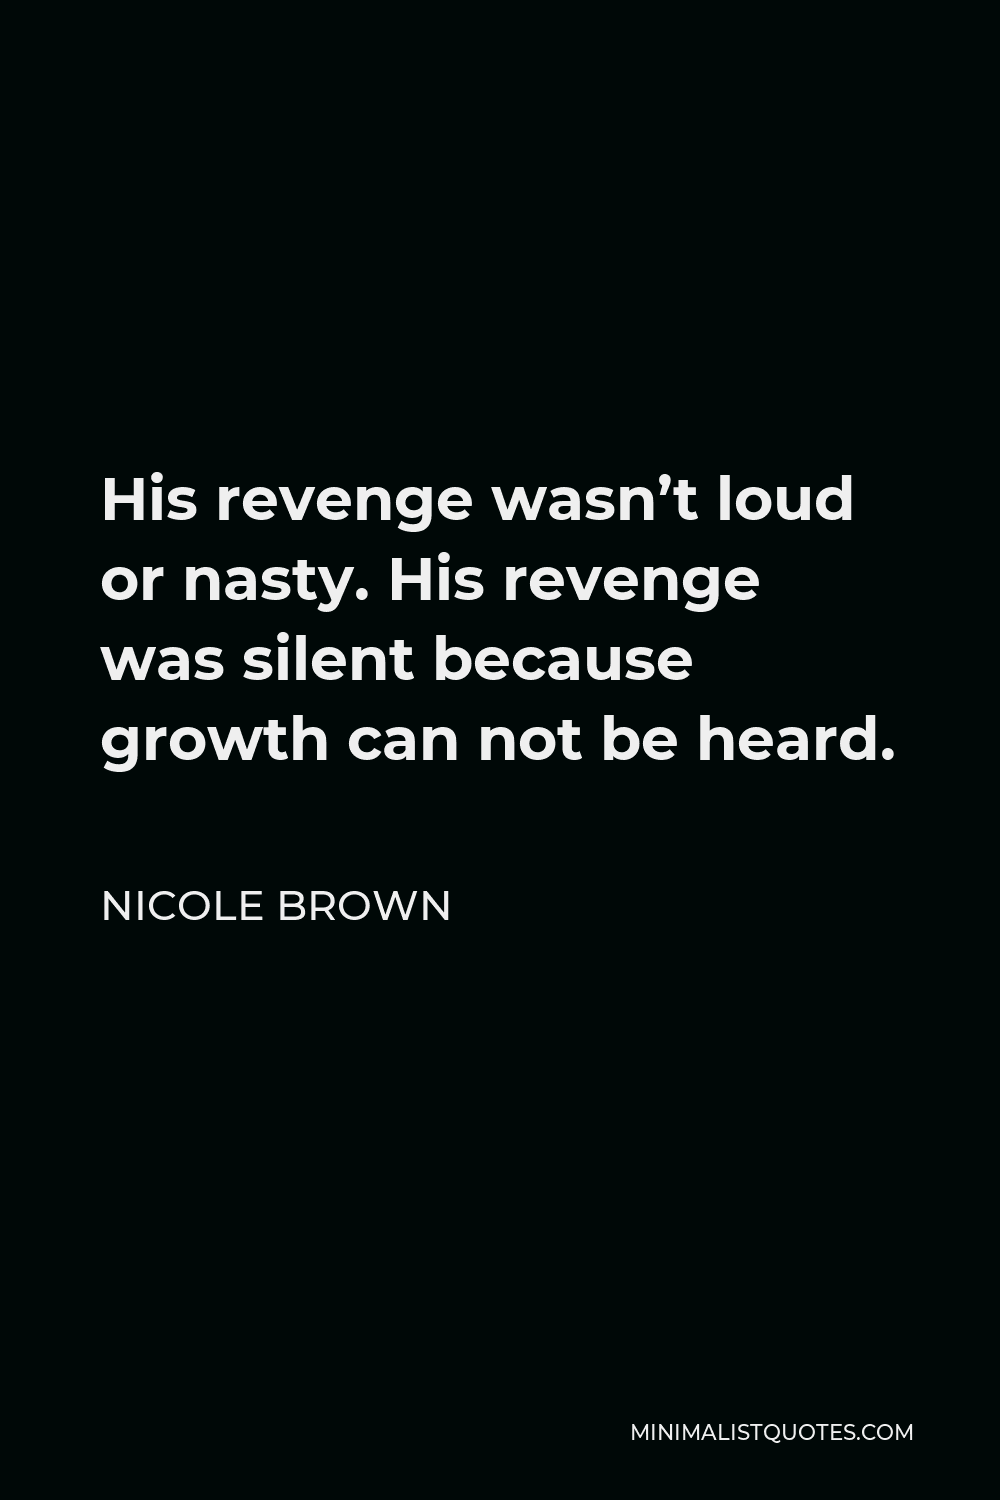 Nicole Brown Quote - His revenge wasn’t loud or nasty. His revenge was silent because growth can not be heard.